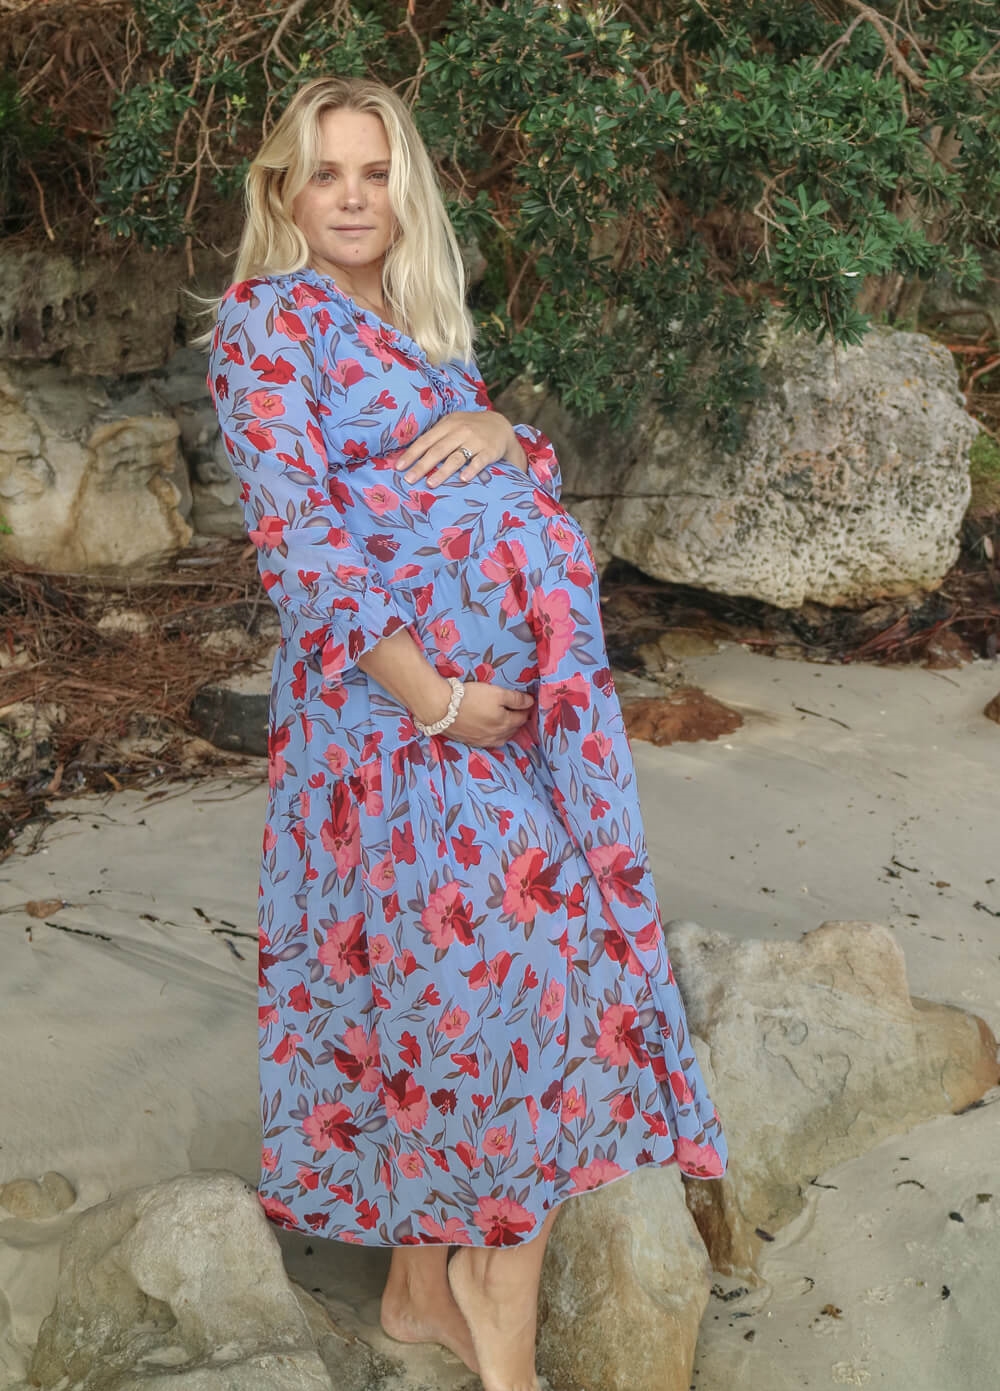 Lait & Co - Wanderlust Maternity Maxi Gown in Blue/Red Floral